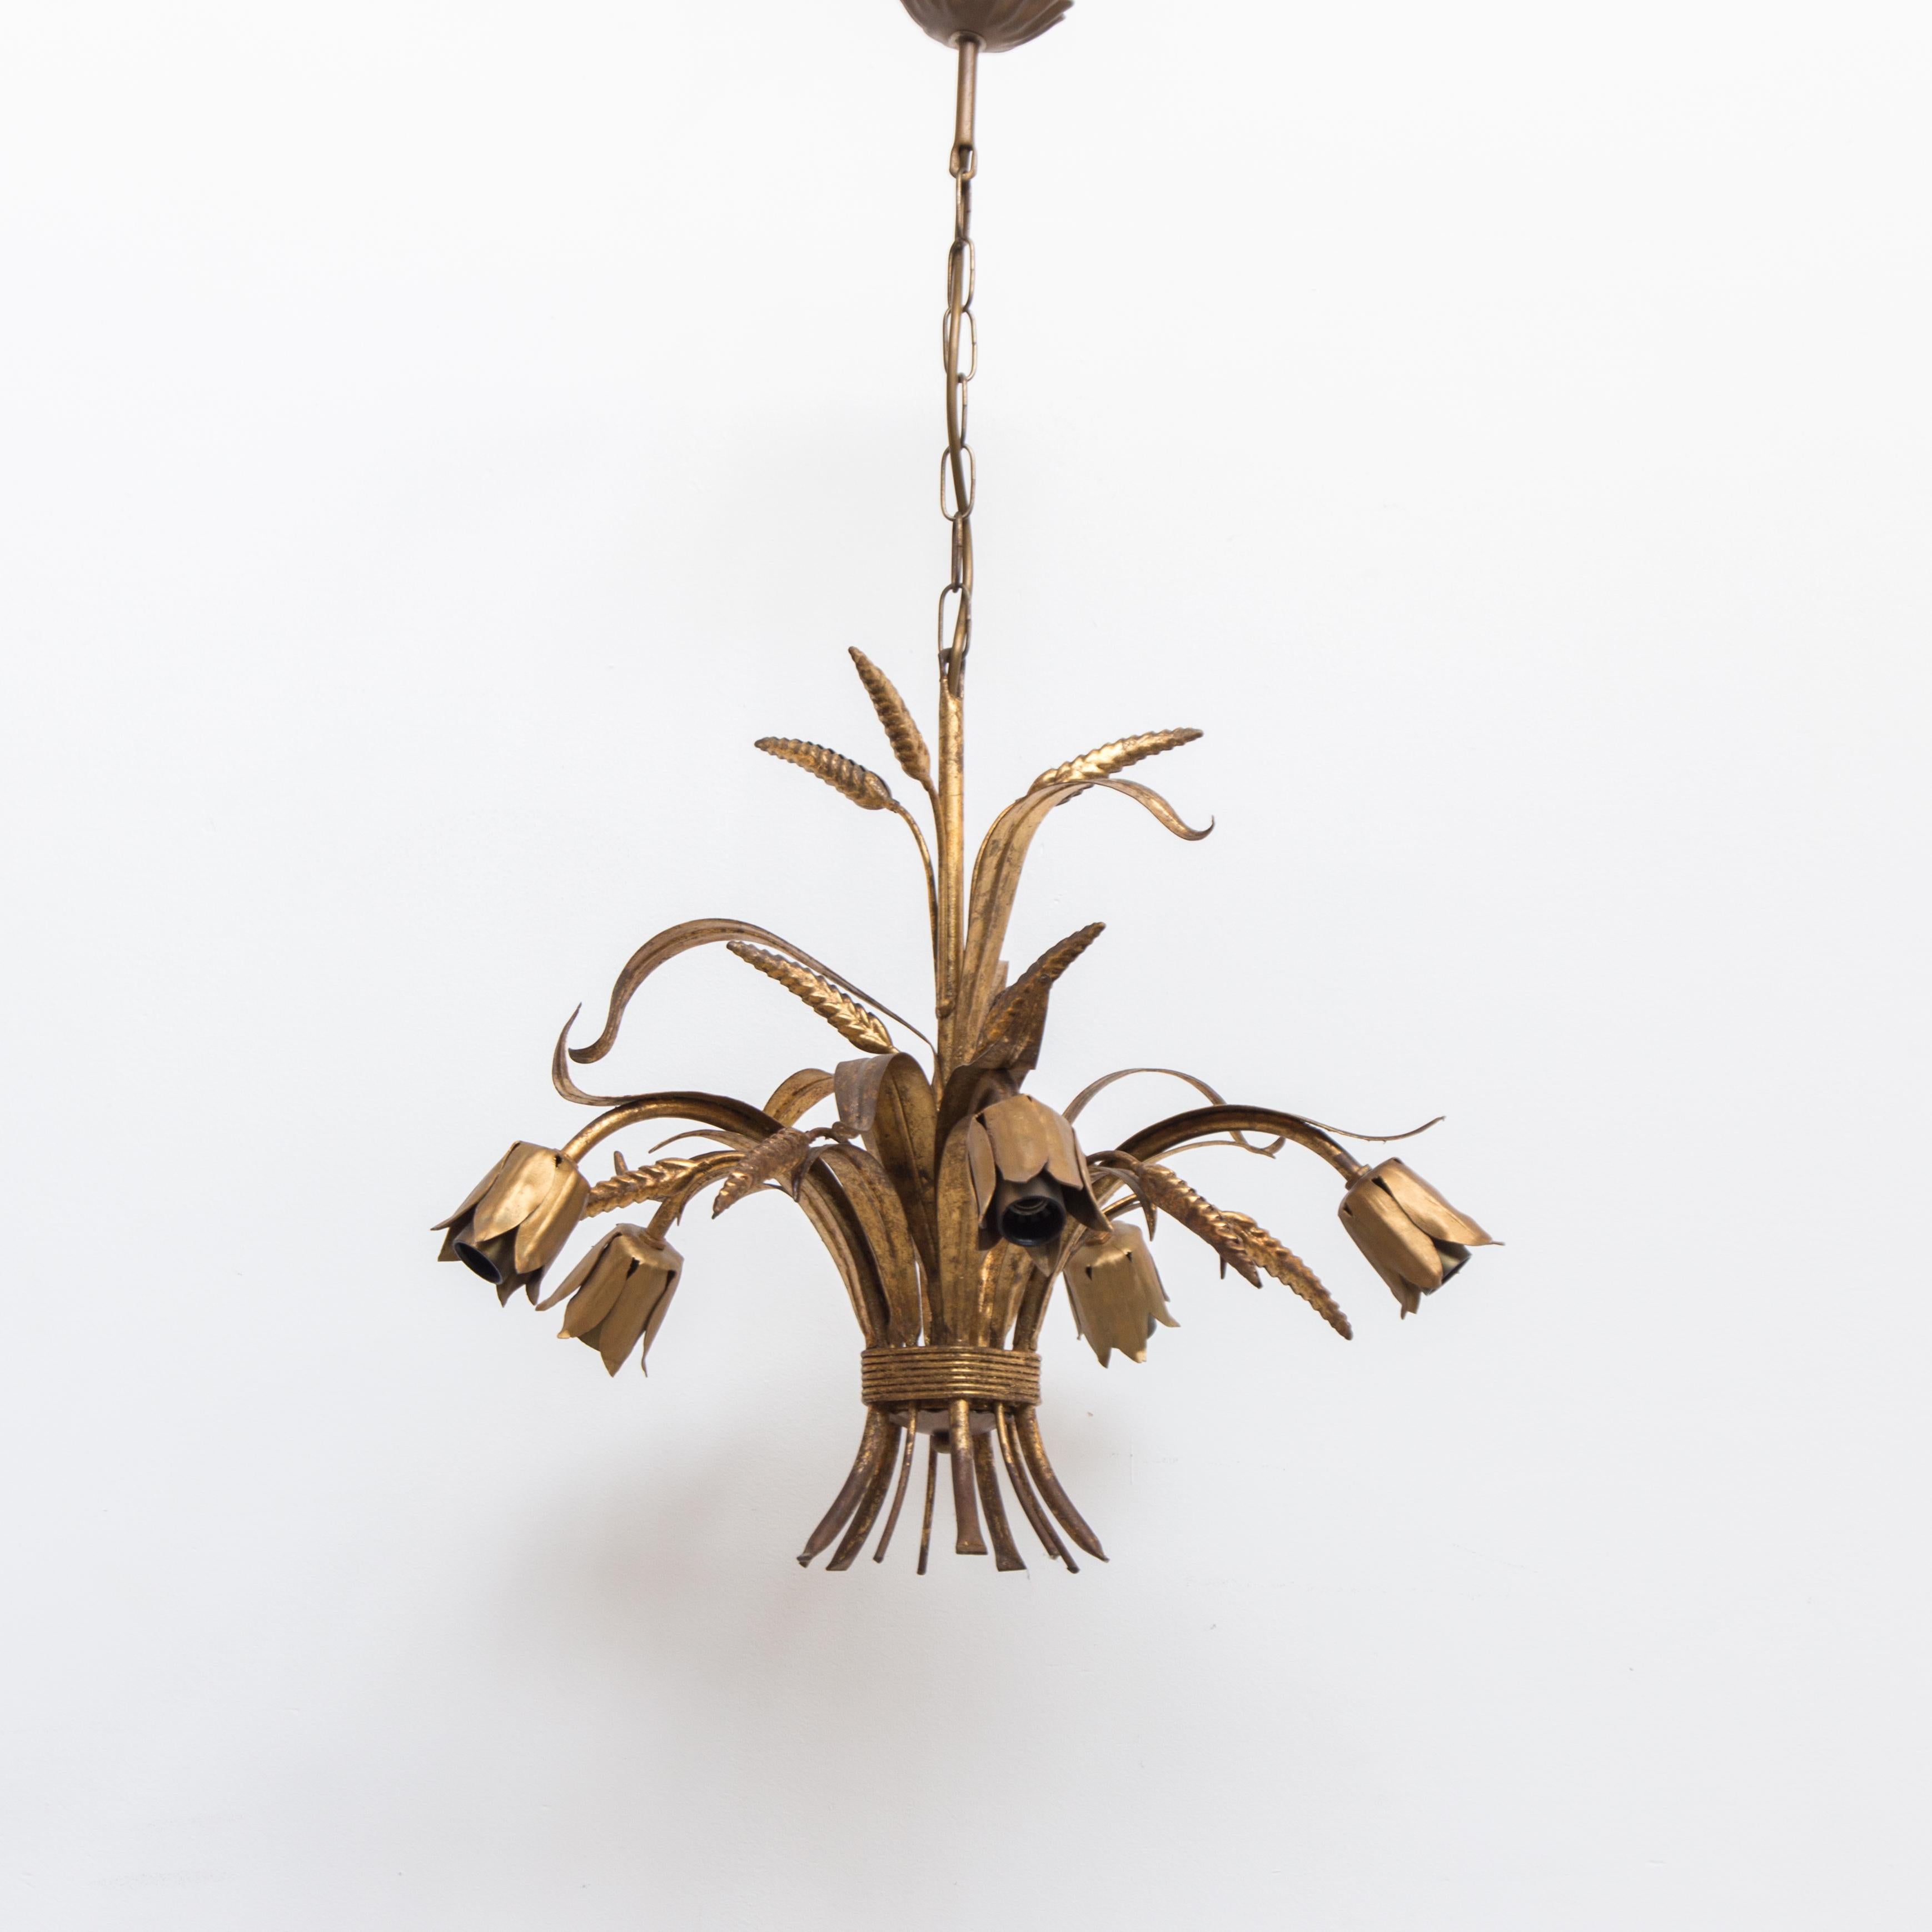 Coco Chanel sheaf of wheat chandelier this pendant light is plated with gold leaf and decorated with wheat leaves the five arms and rare up side down arms are perfectly cited for e10 flame bulbs. This pendant light has a warm antique gold finish.